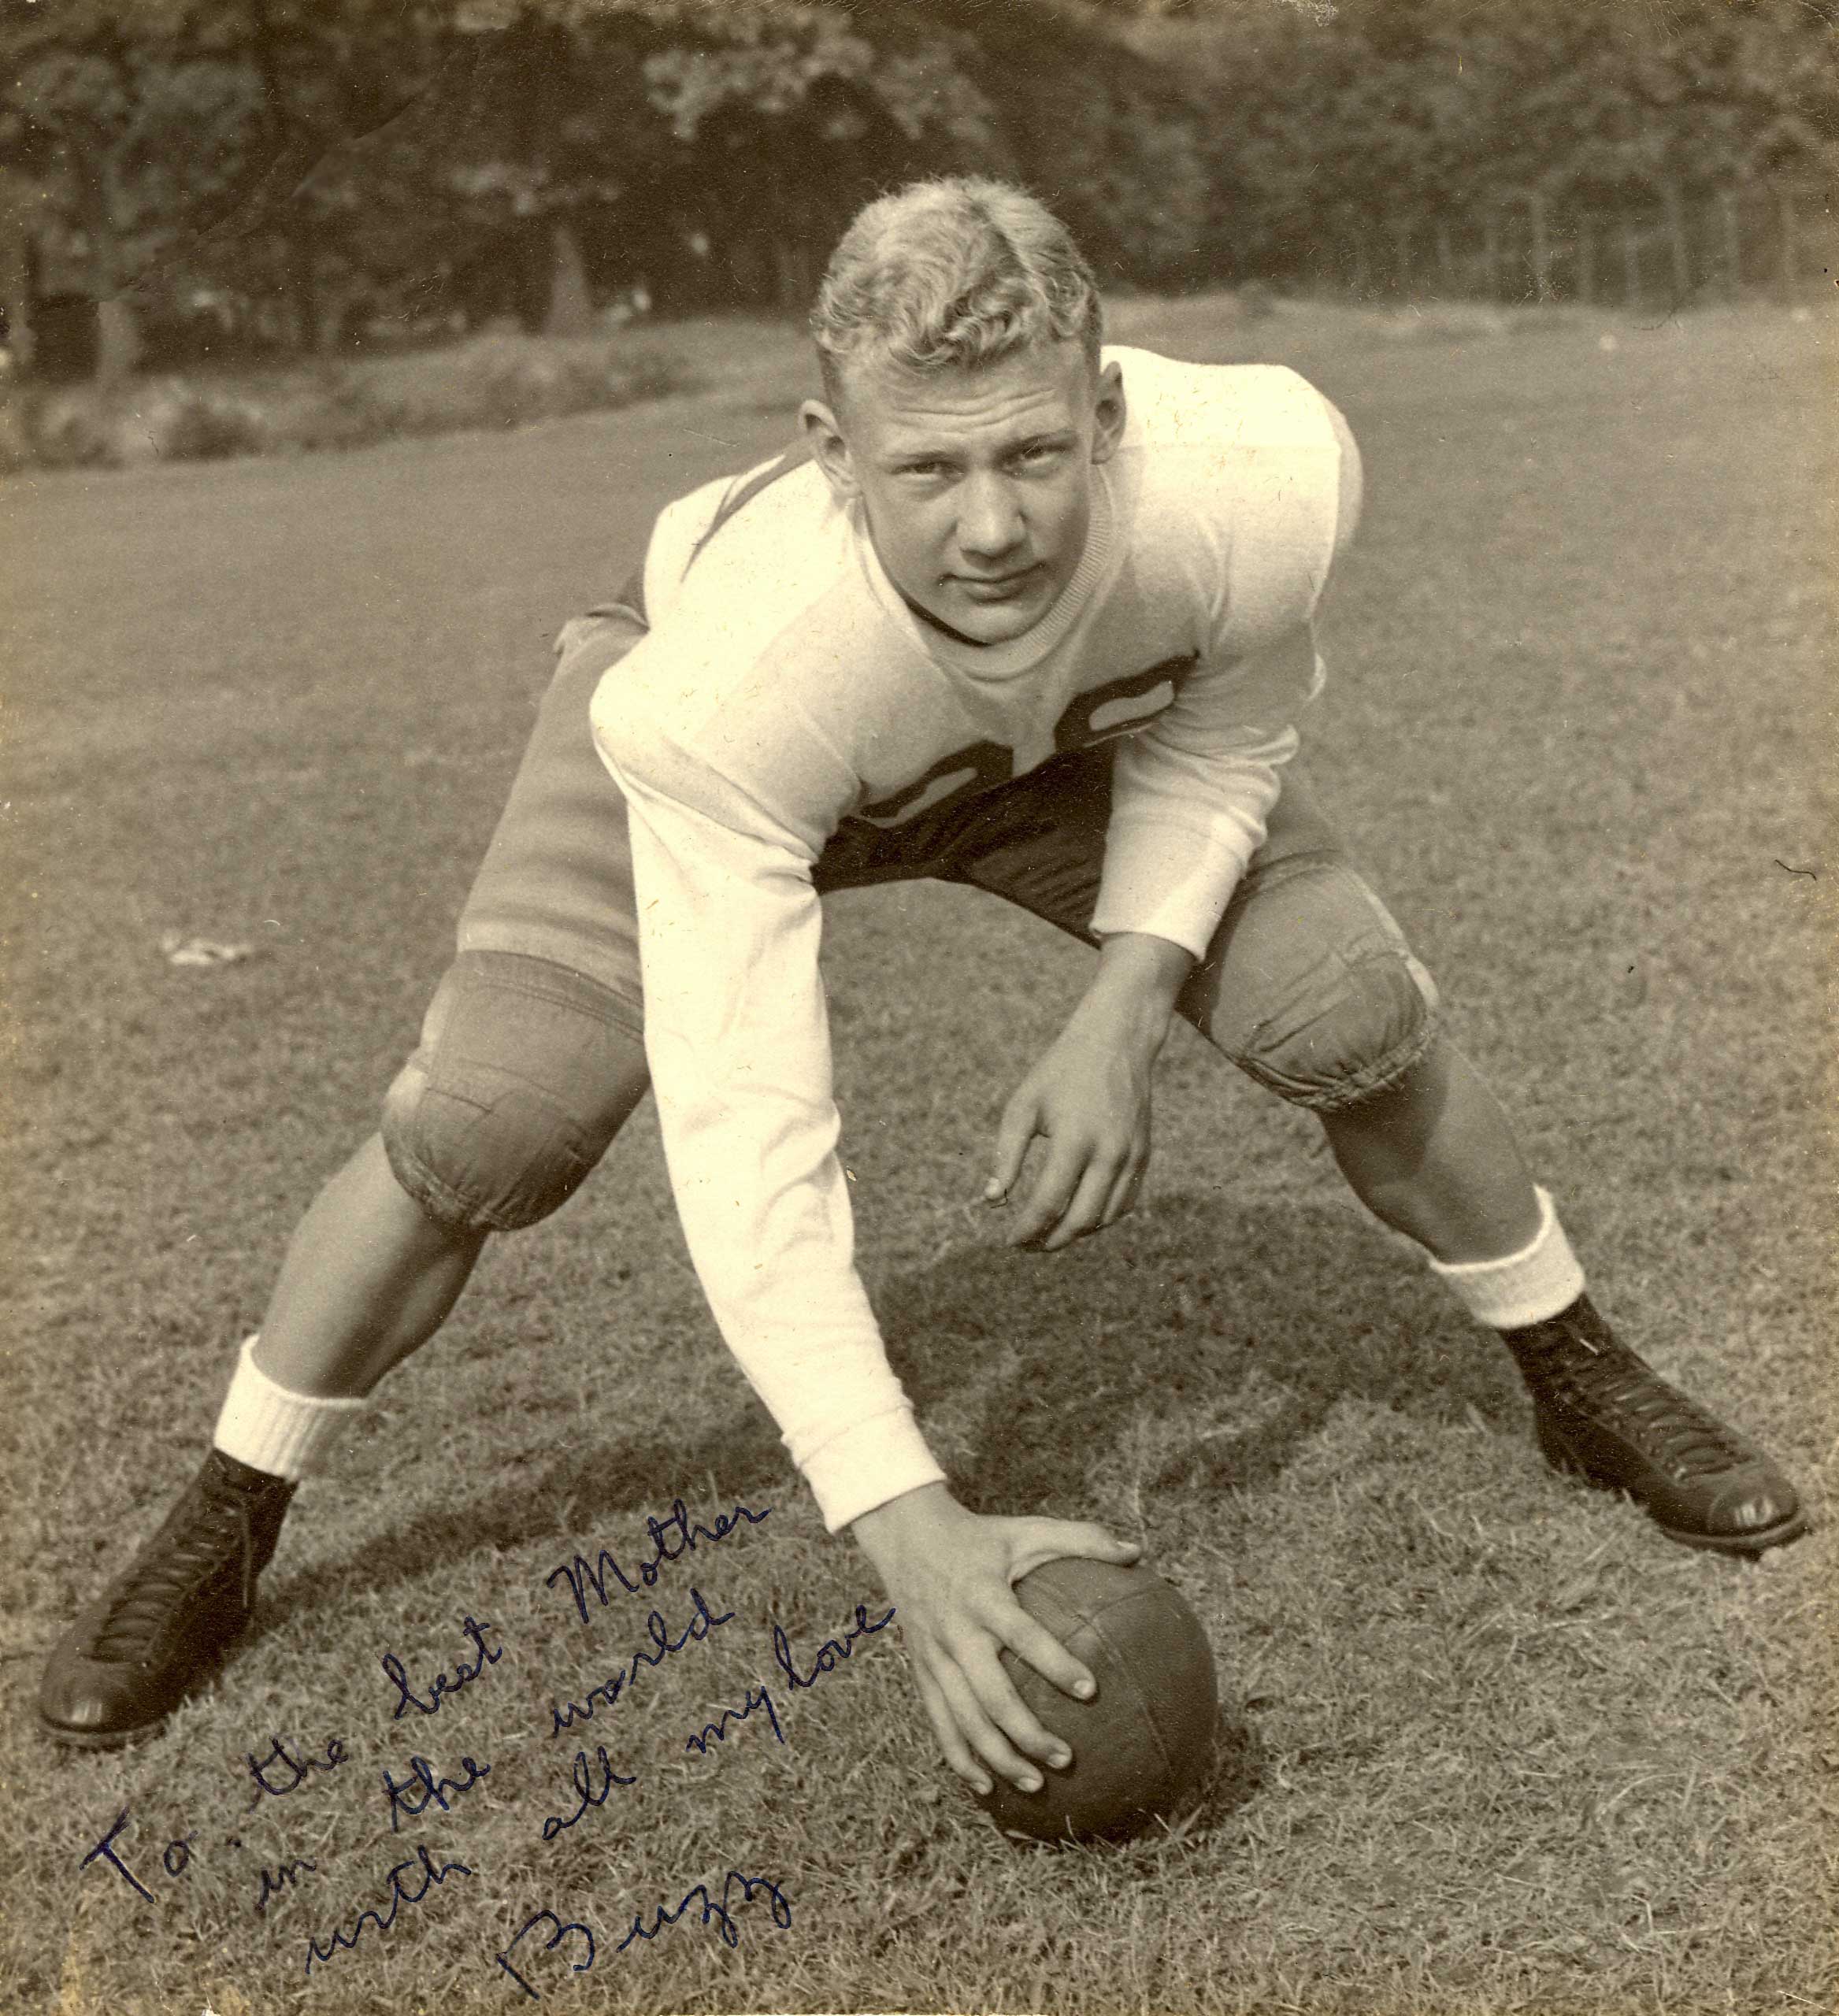 Aldrin played center for Montclair High School's football team which went undefeated in 1946.